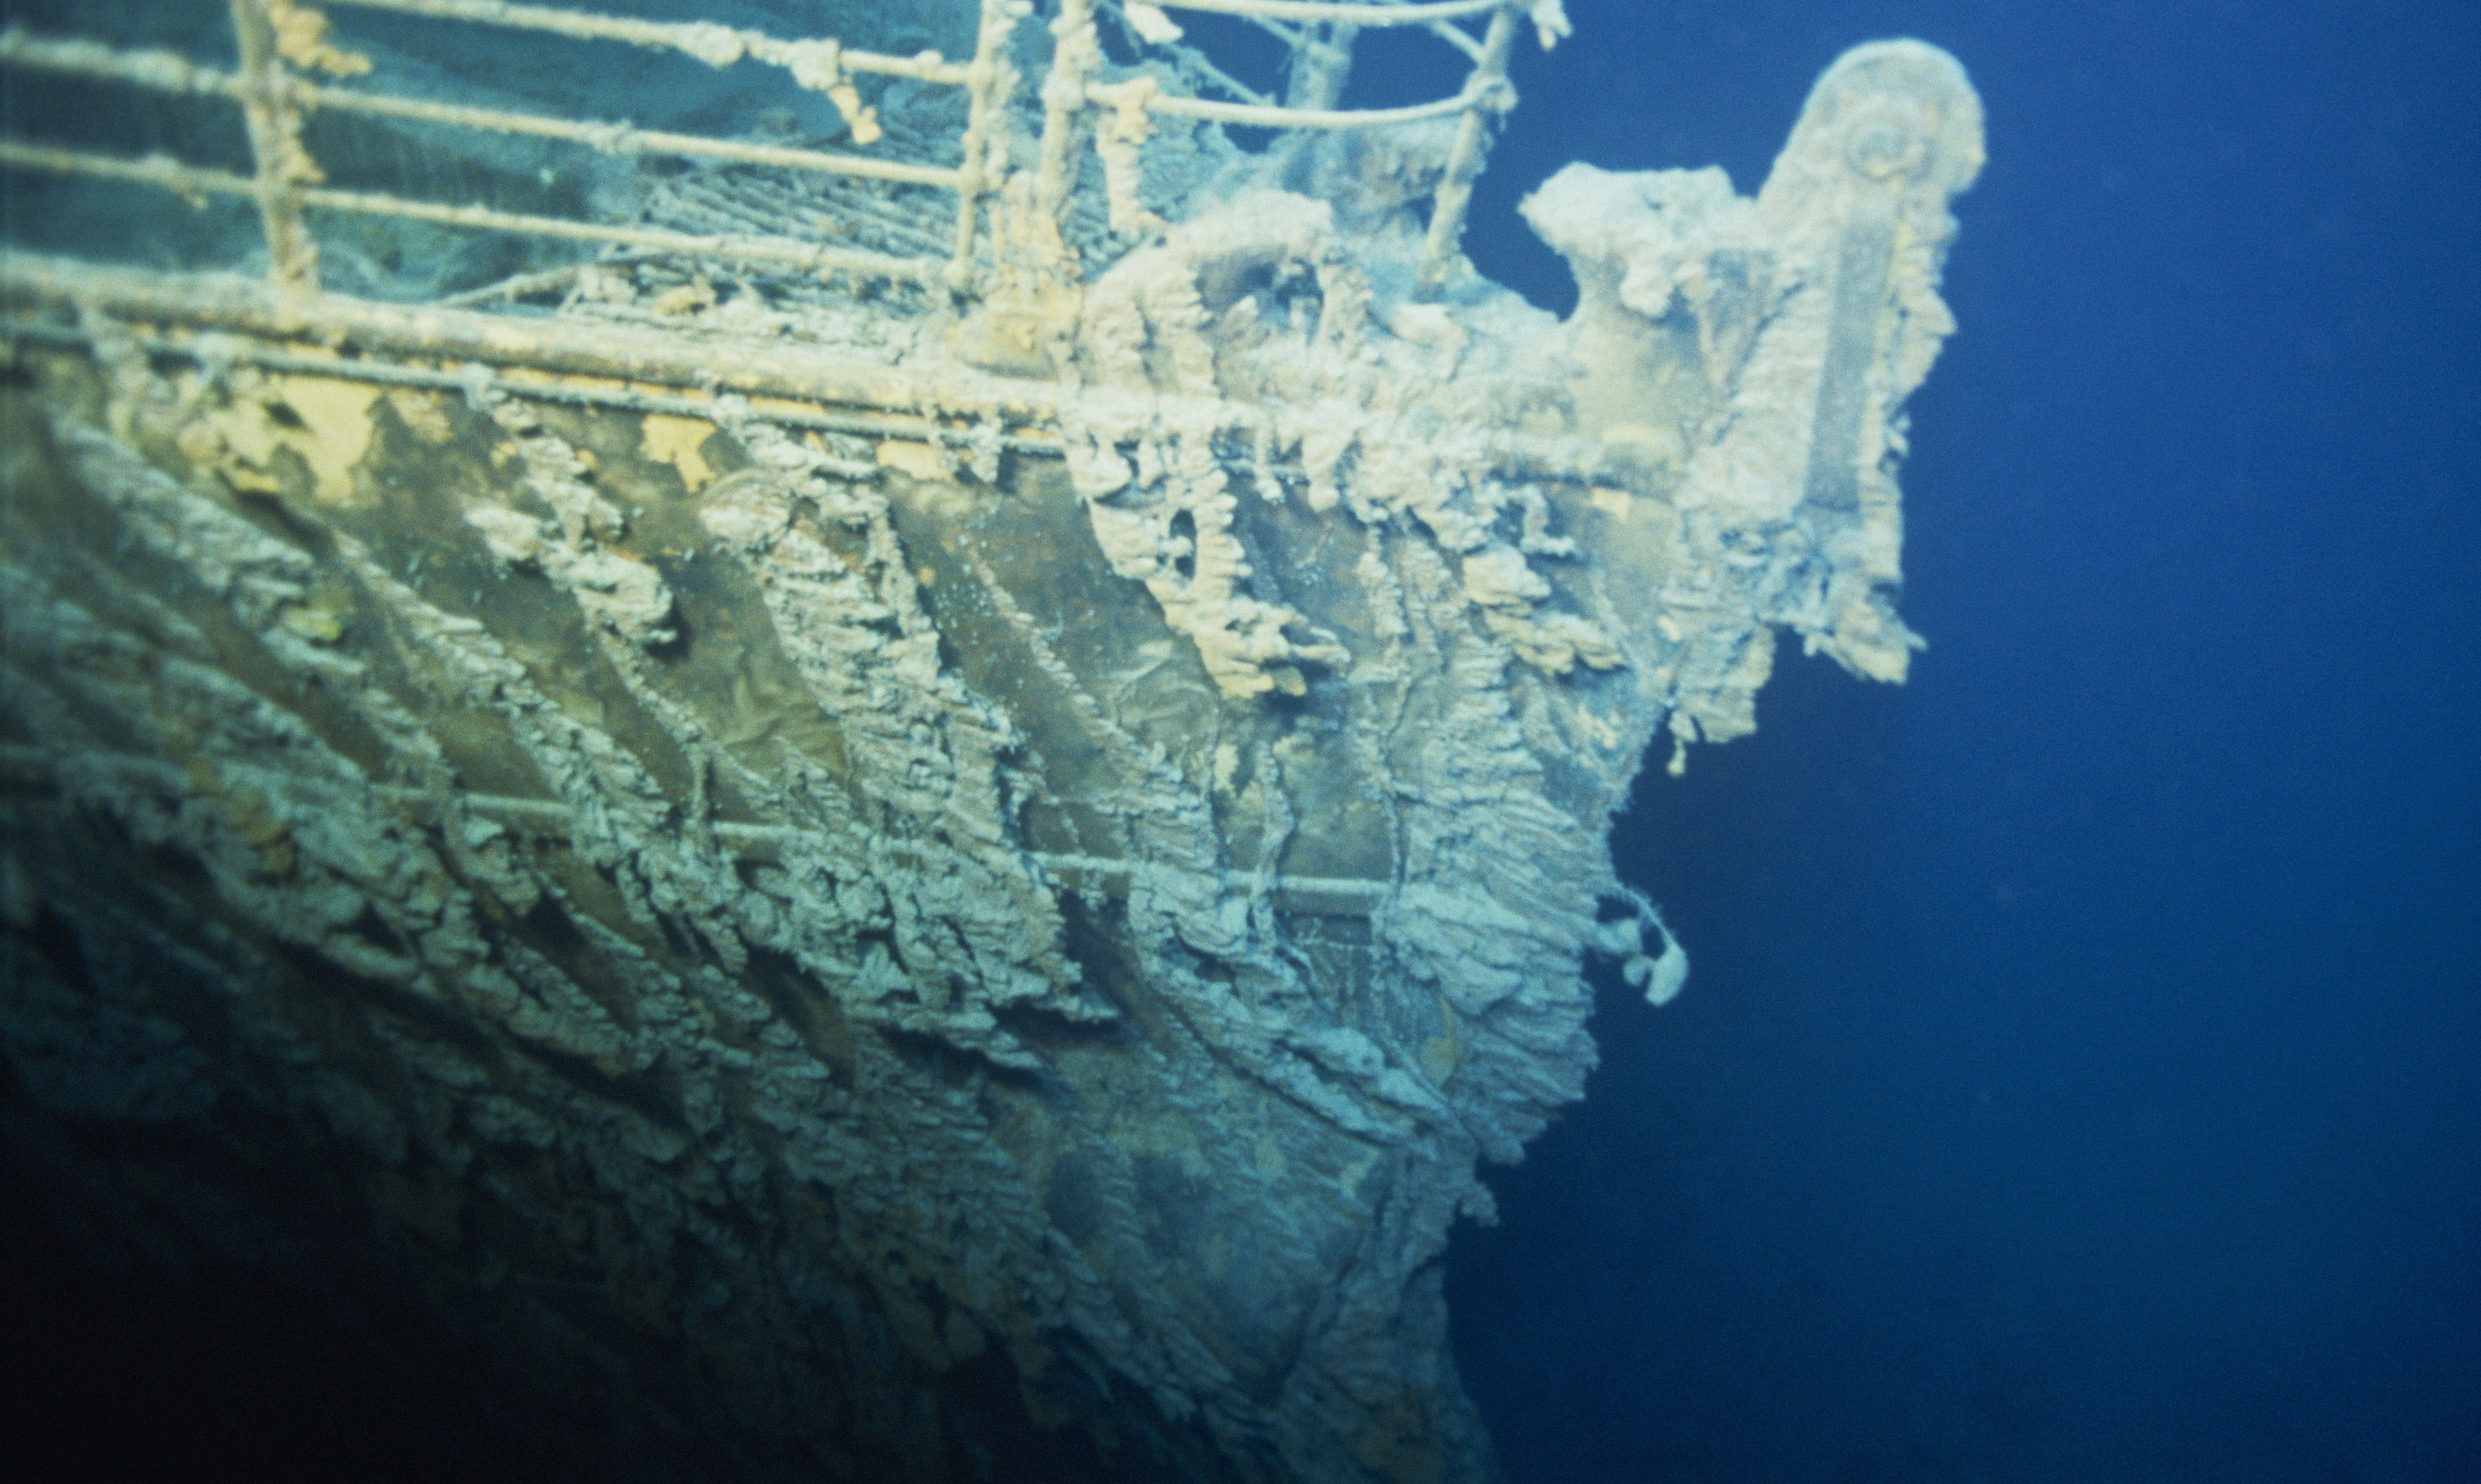 The vessel is used to take tourists to see the wreckage of the Titanic